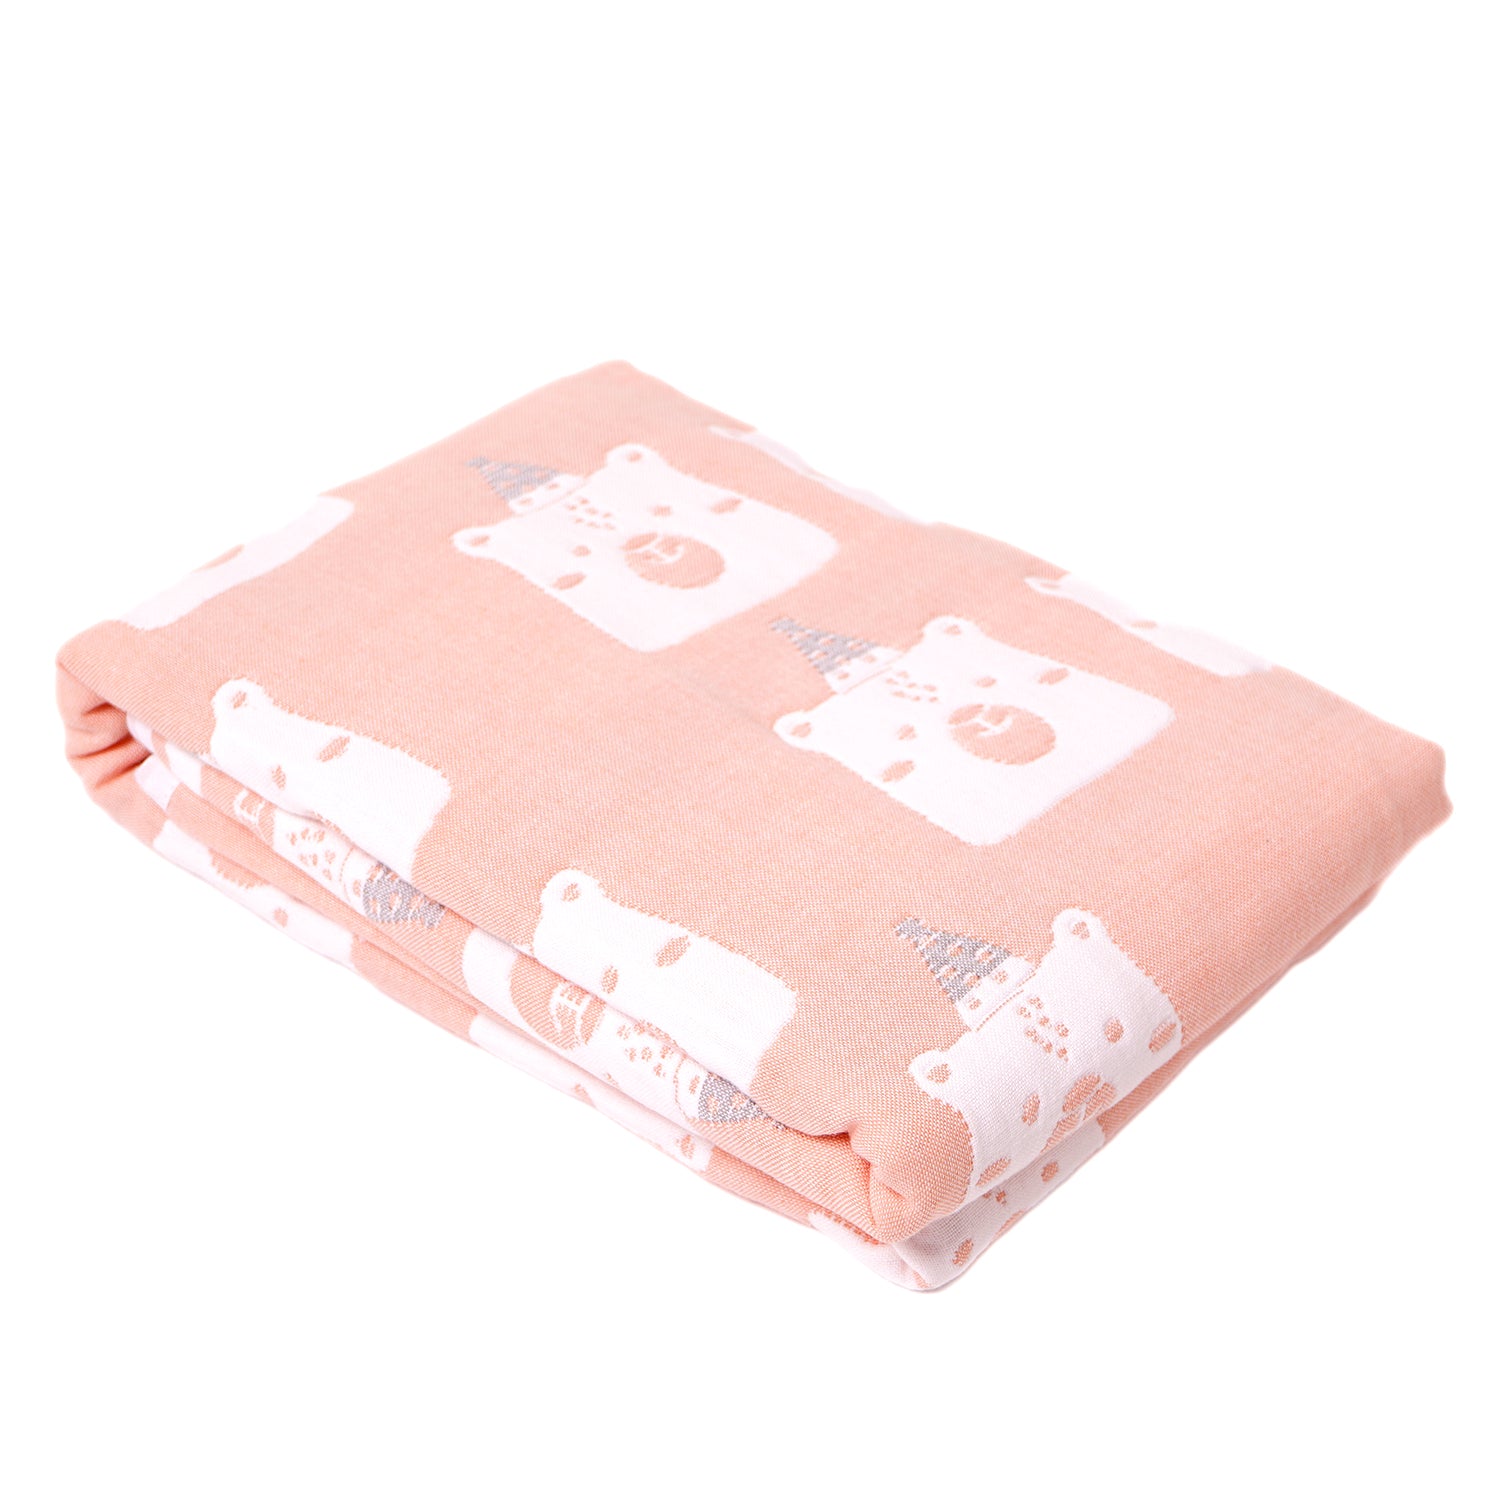 Organic Cotton Yarn Dyed Blanket - Party Animals - Cotton Pink